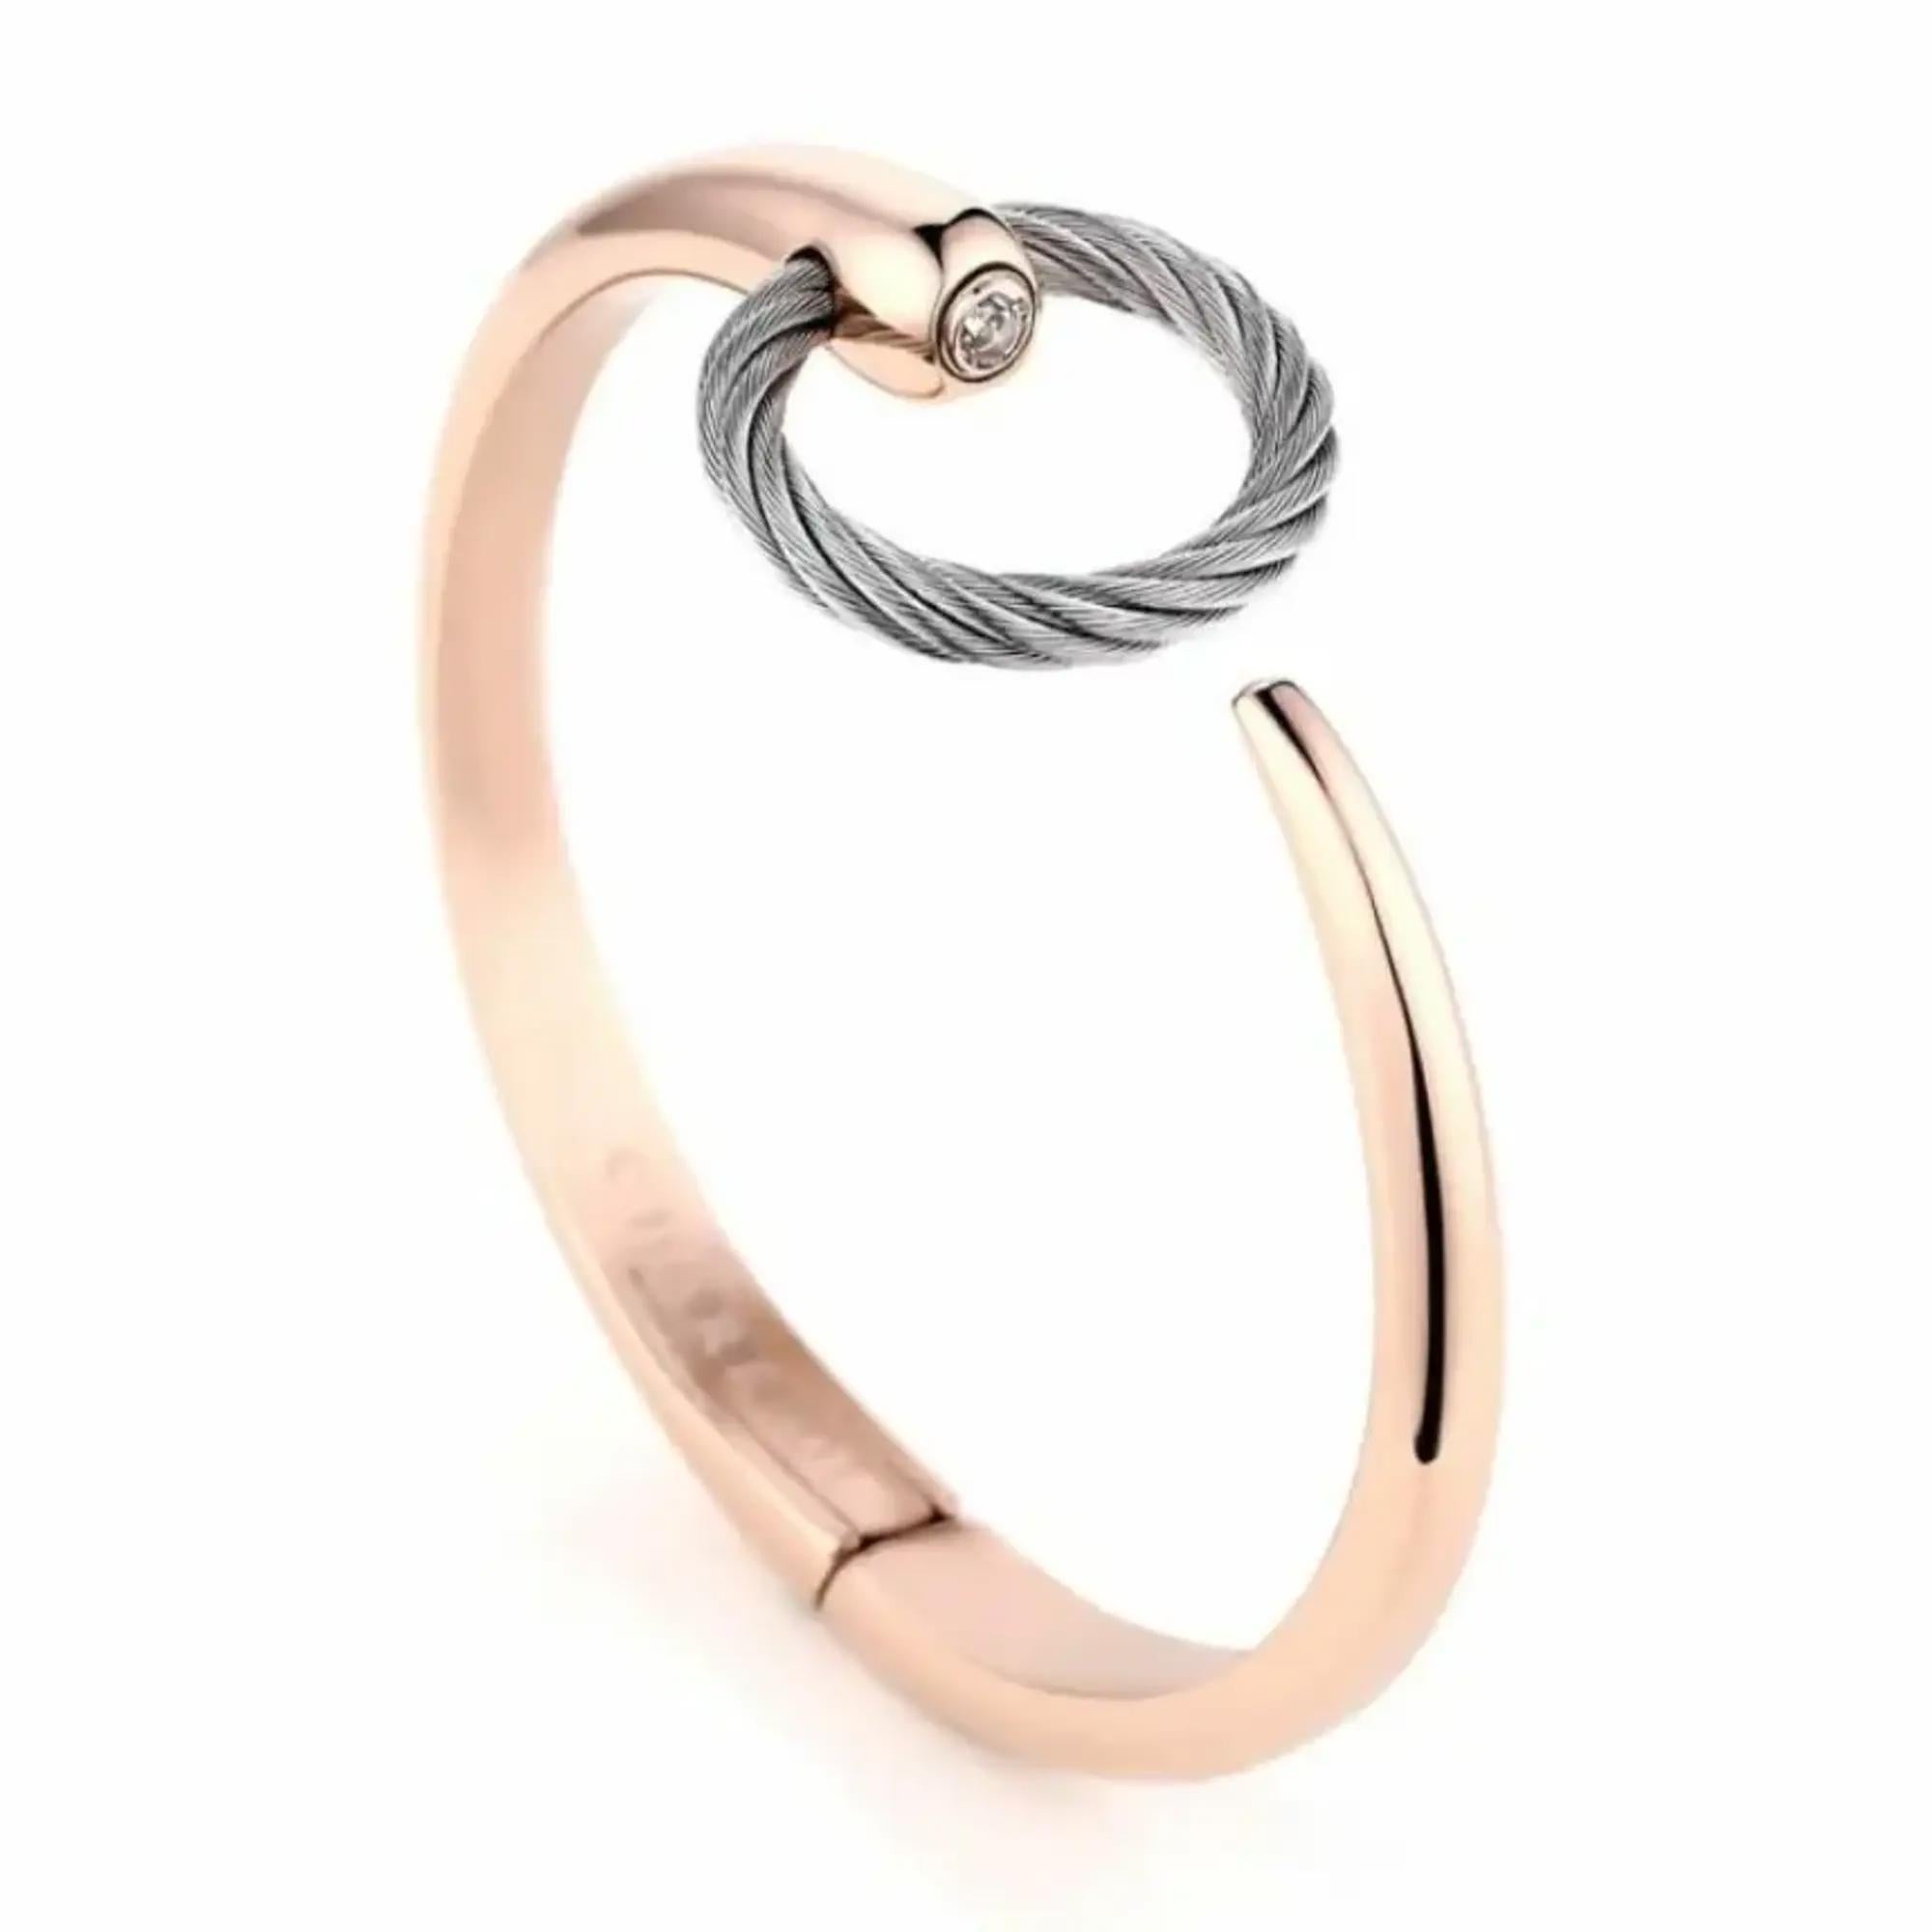 This gorgeous Charriol Infinity Zen open cuff bangle bracelet is a perfect addition to your everyday look. Super stackable and easy to wear, it features a stainless steel hinged bangle with rose gold PVD plating featuring a steel cable circular